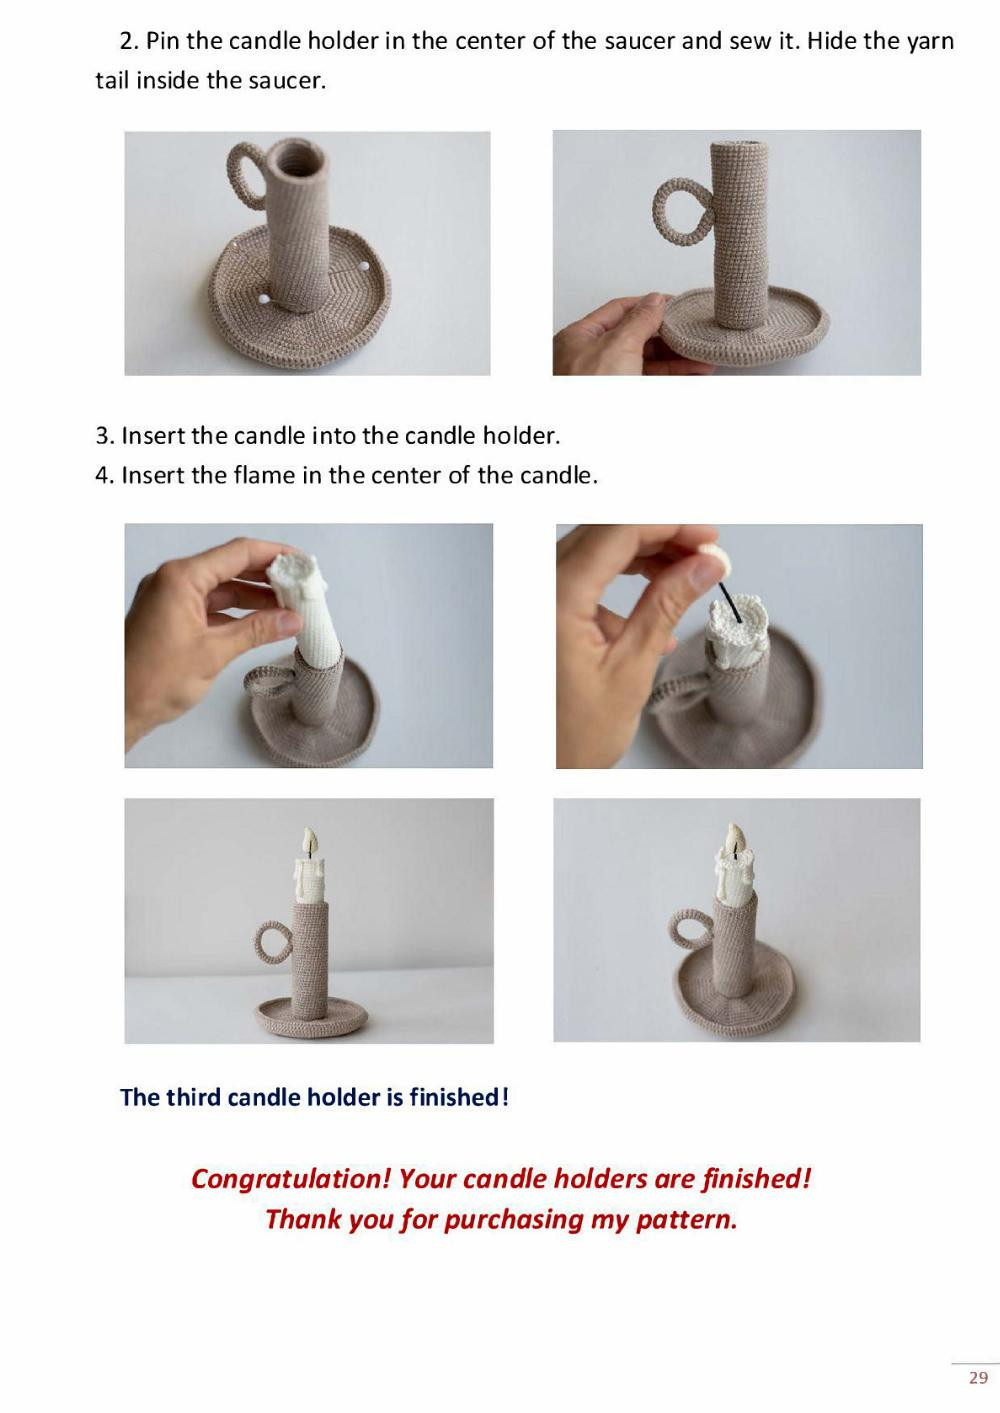 candle holders with candle